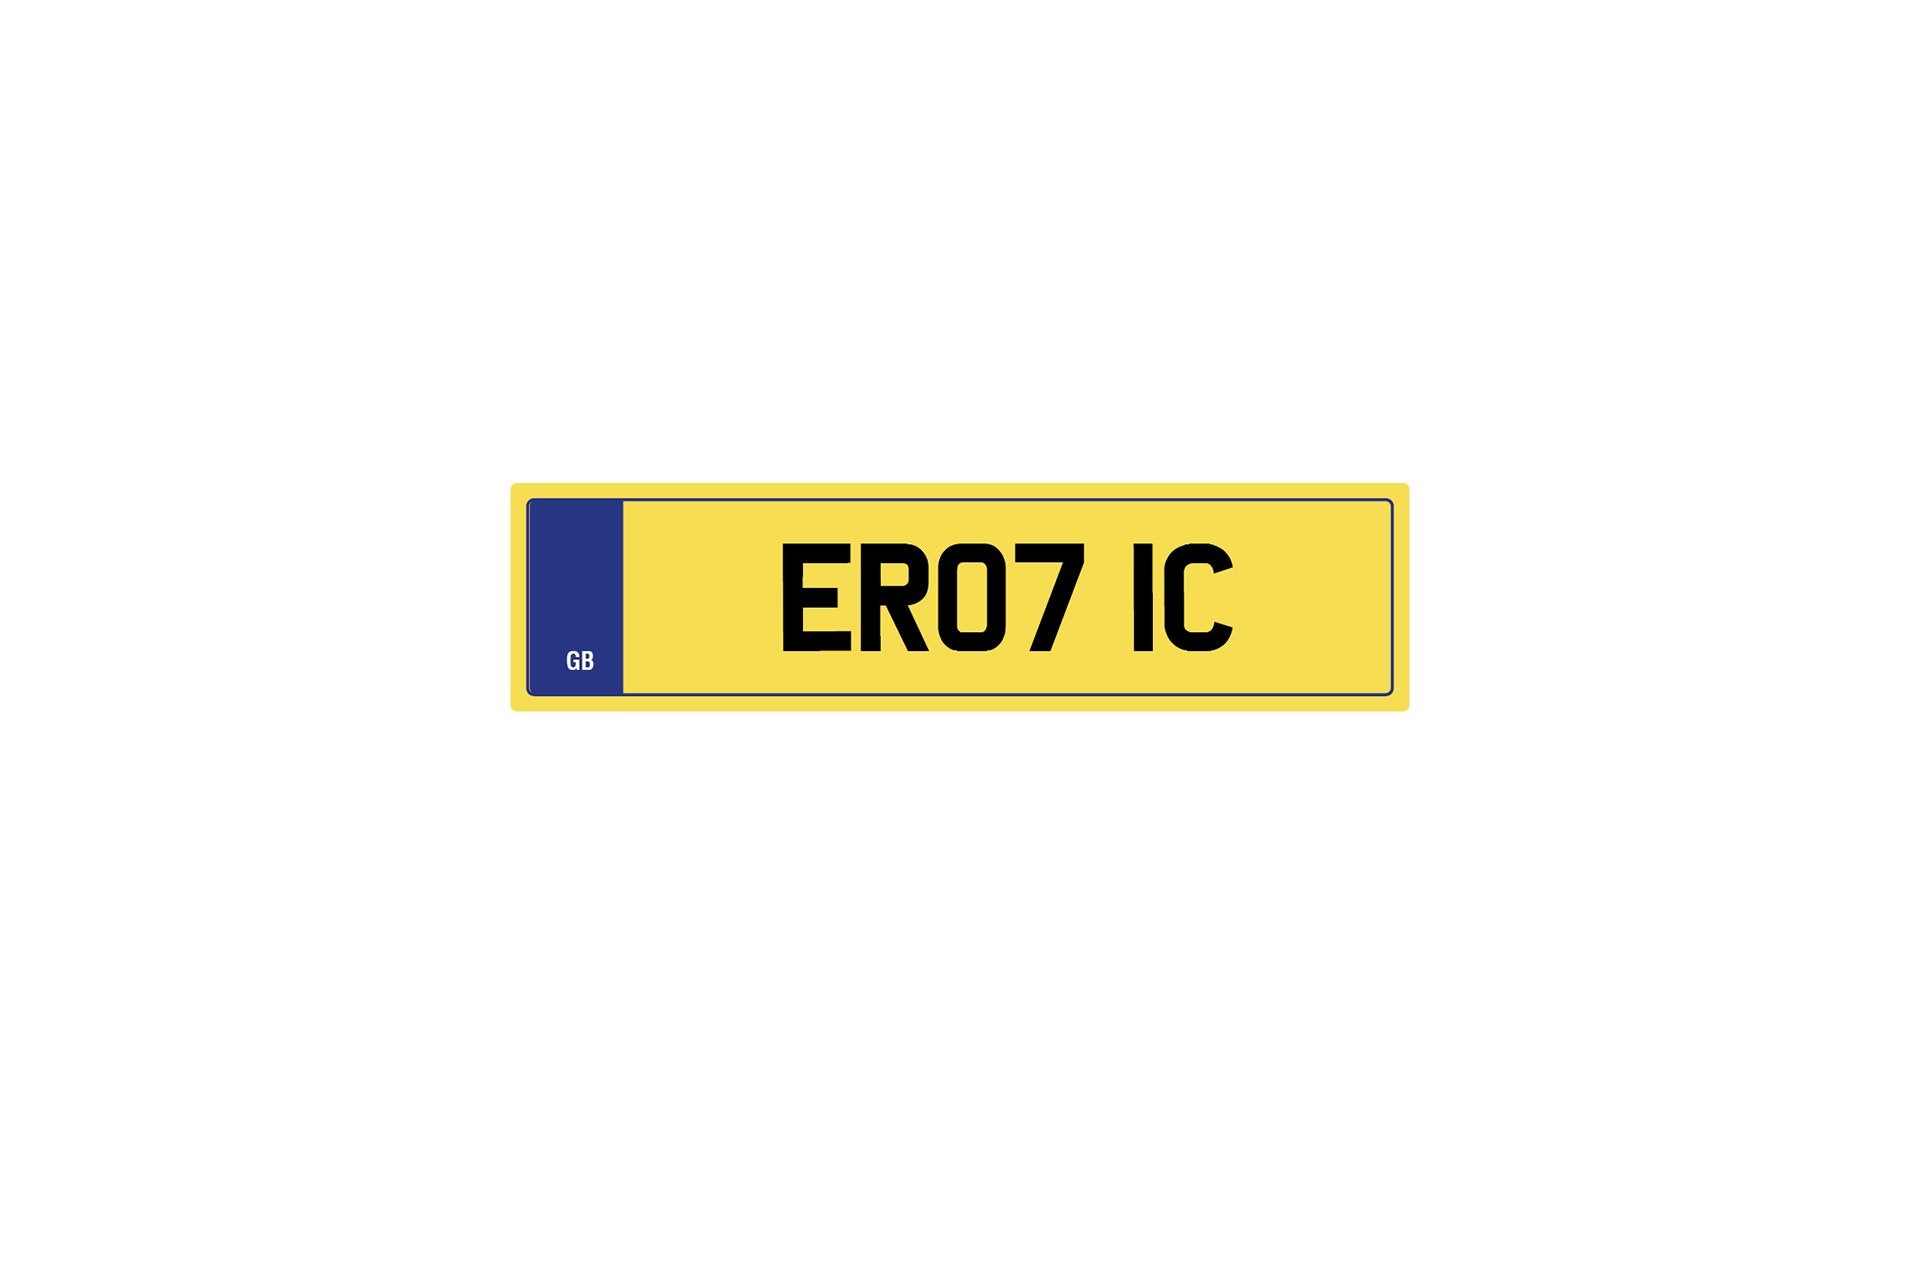 Private Plate Ero7 Ic by Kahn - Image 237